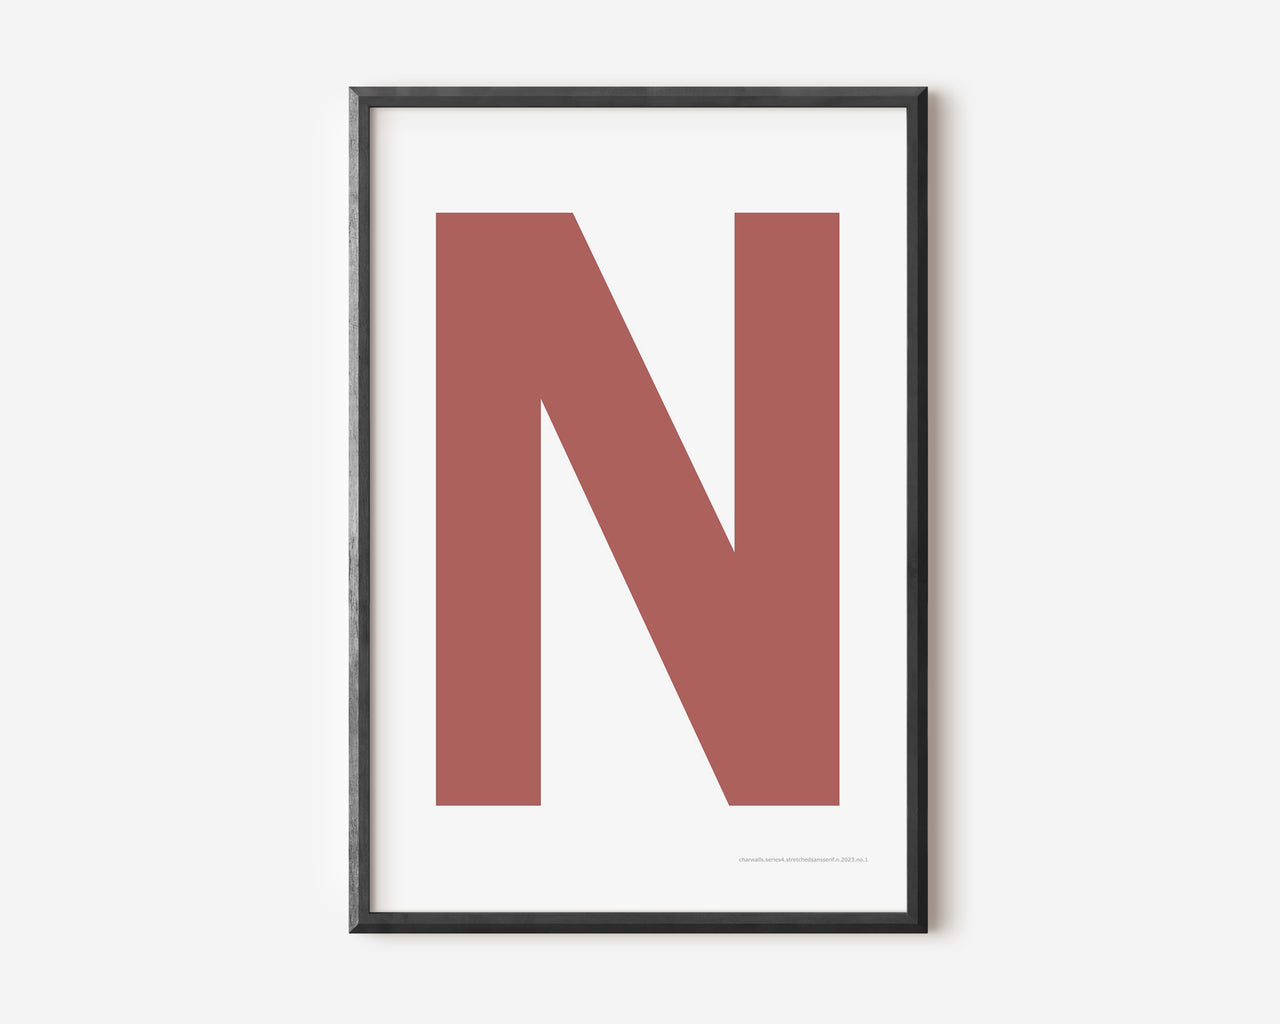 Modern art print with an uppercase Nantucket red letter N on a white background.